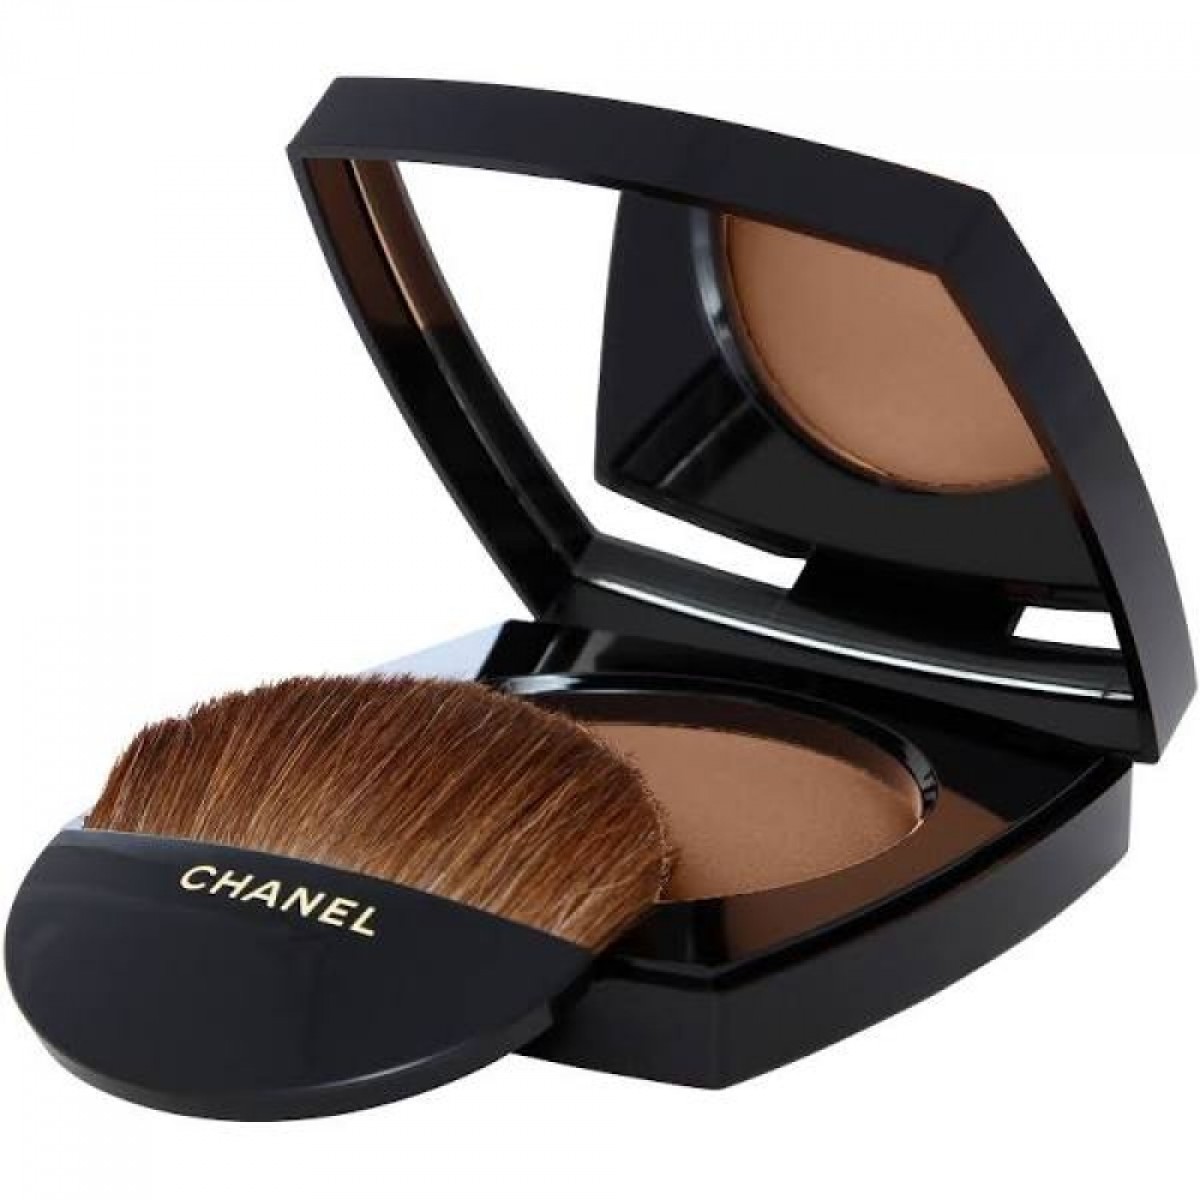 Chanel Les Beiges Healthy Glow Foundation  British Beauty Blogger